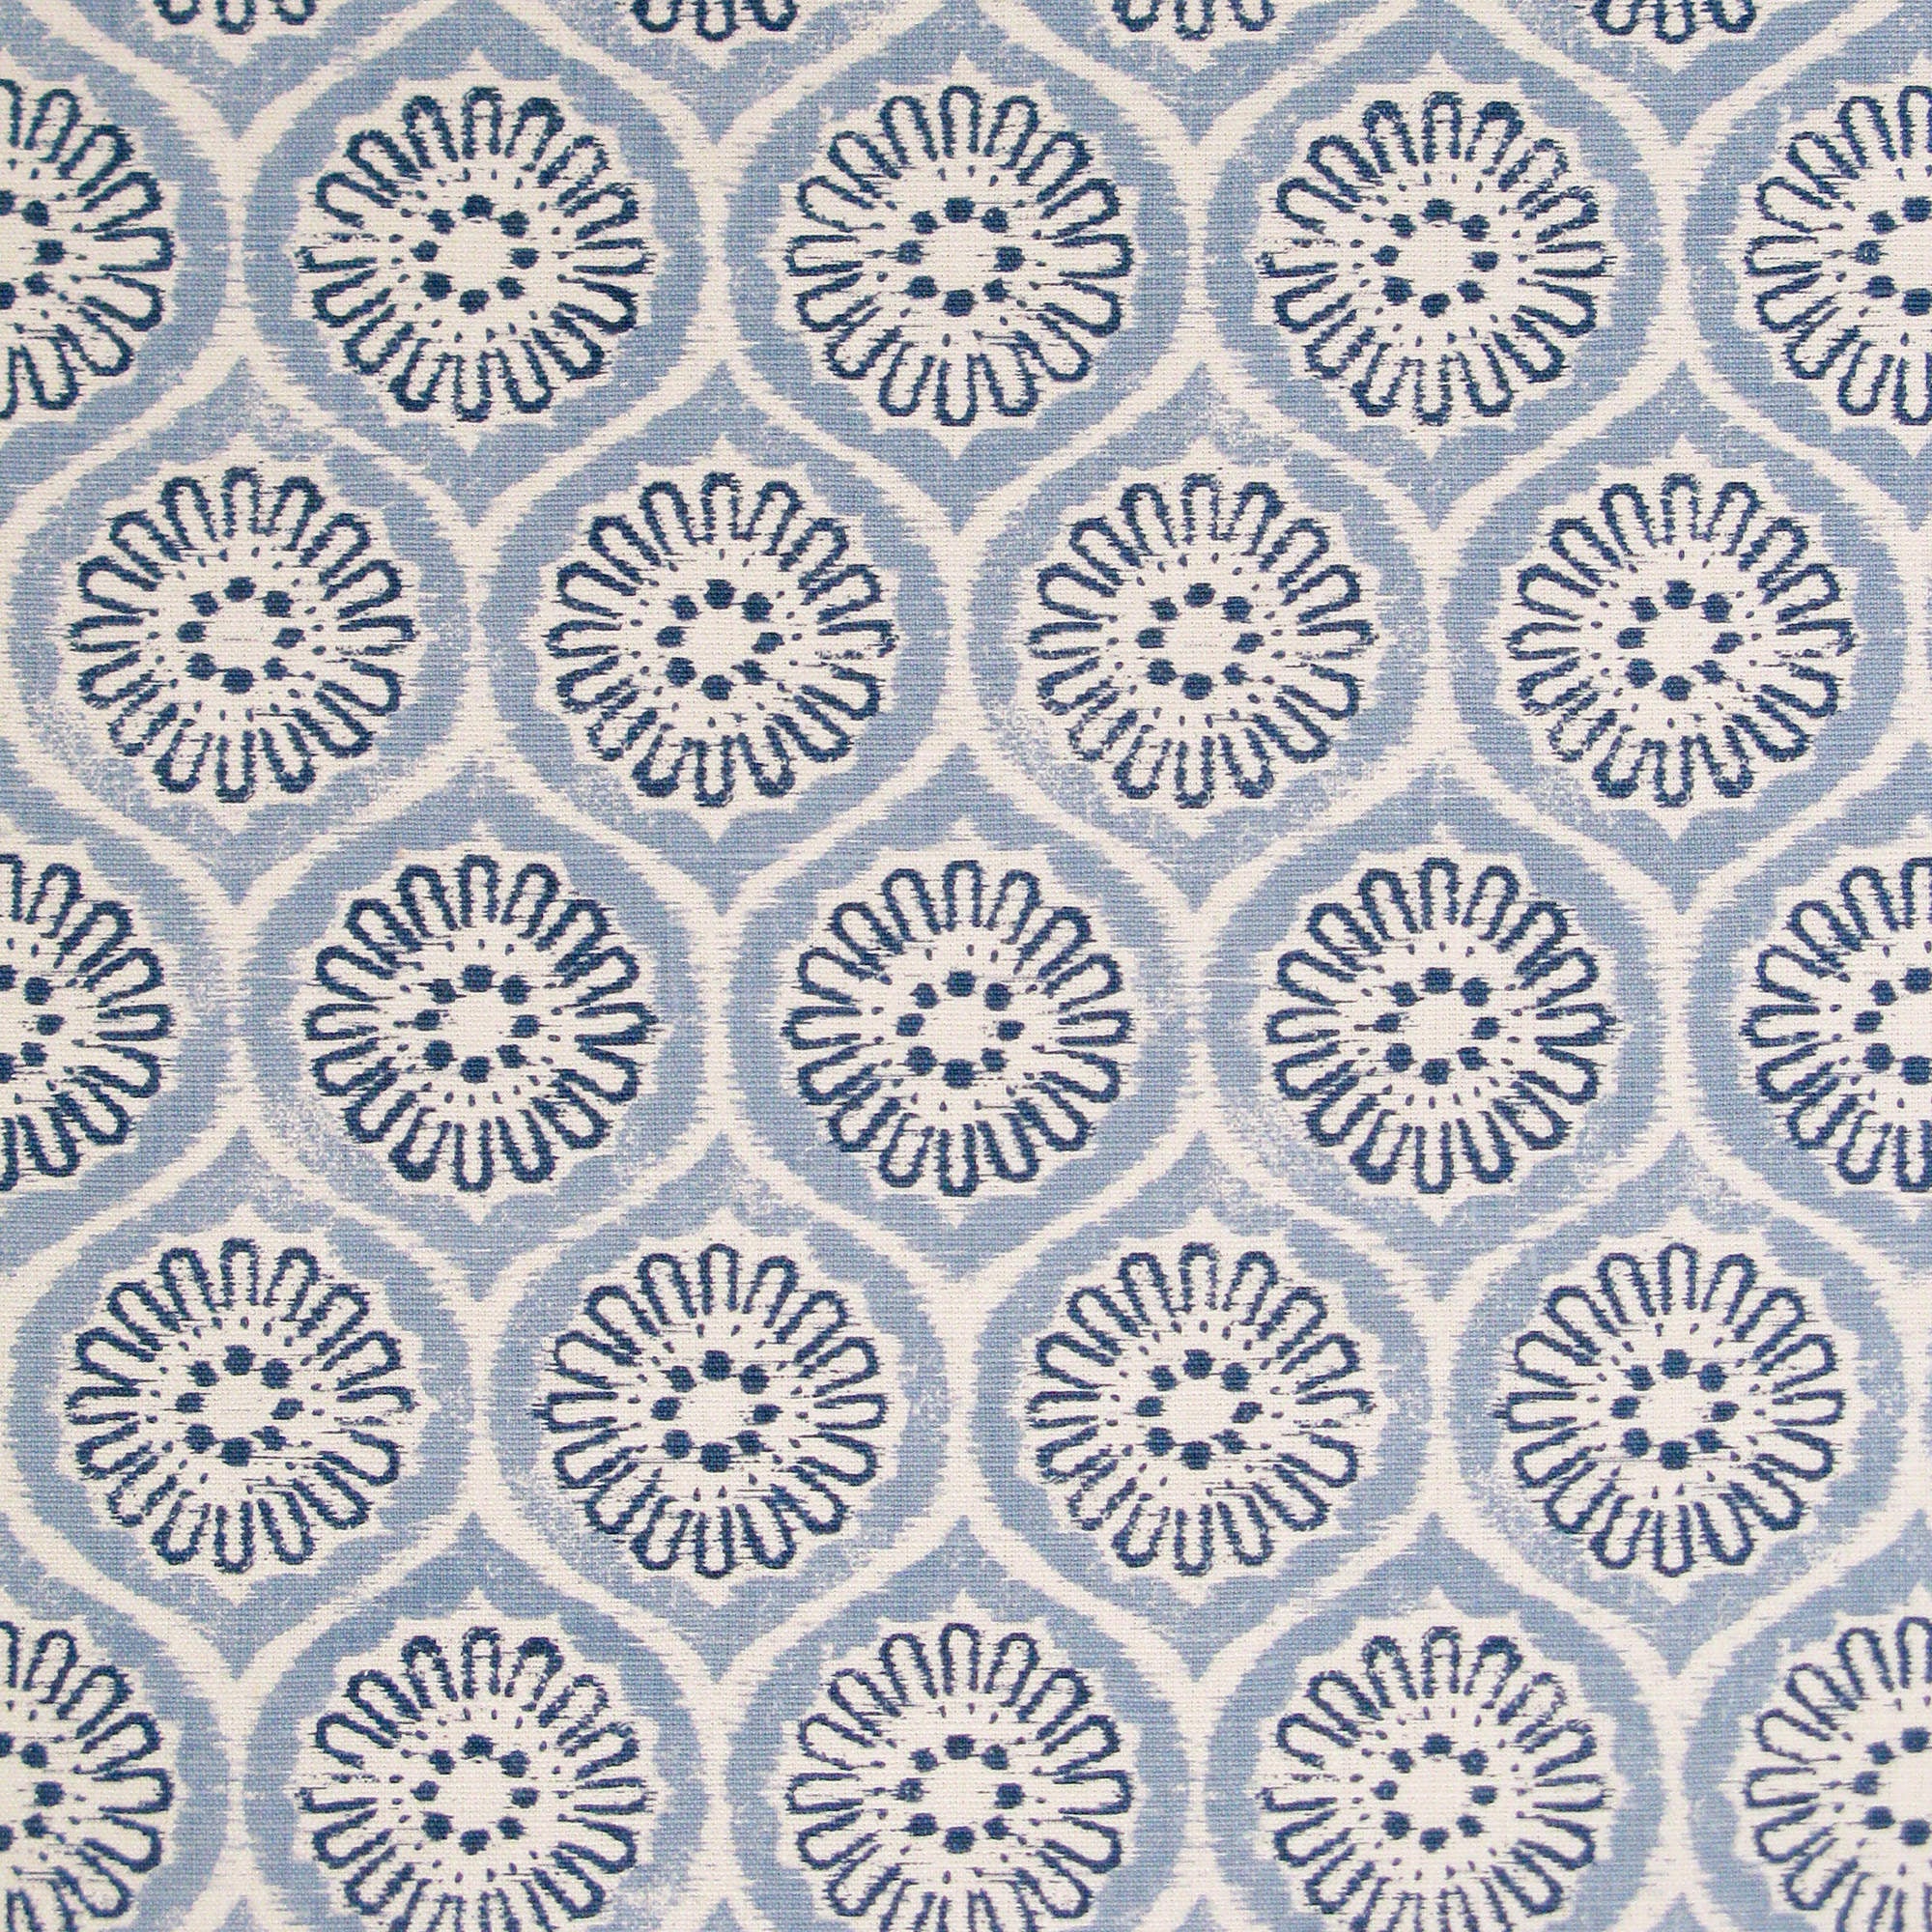 Detail of fabric in a floral lattice print in blue and navy on a cream field.